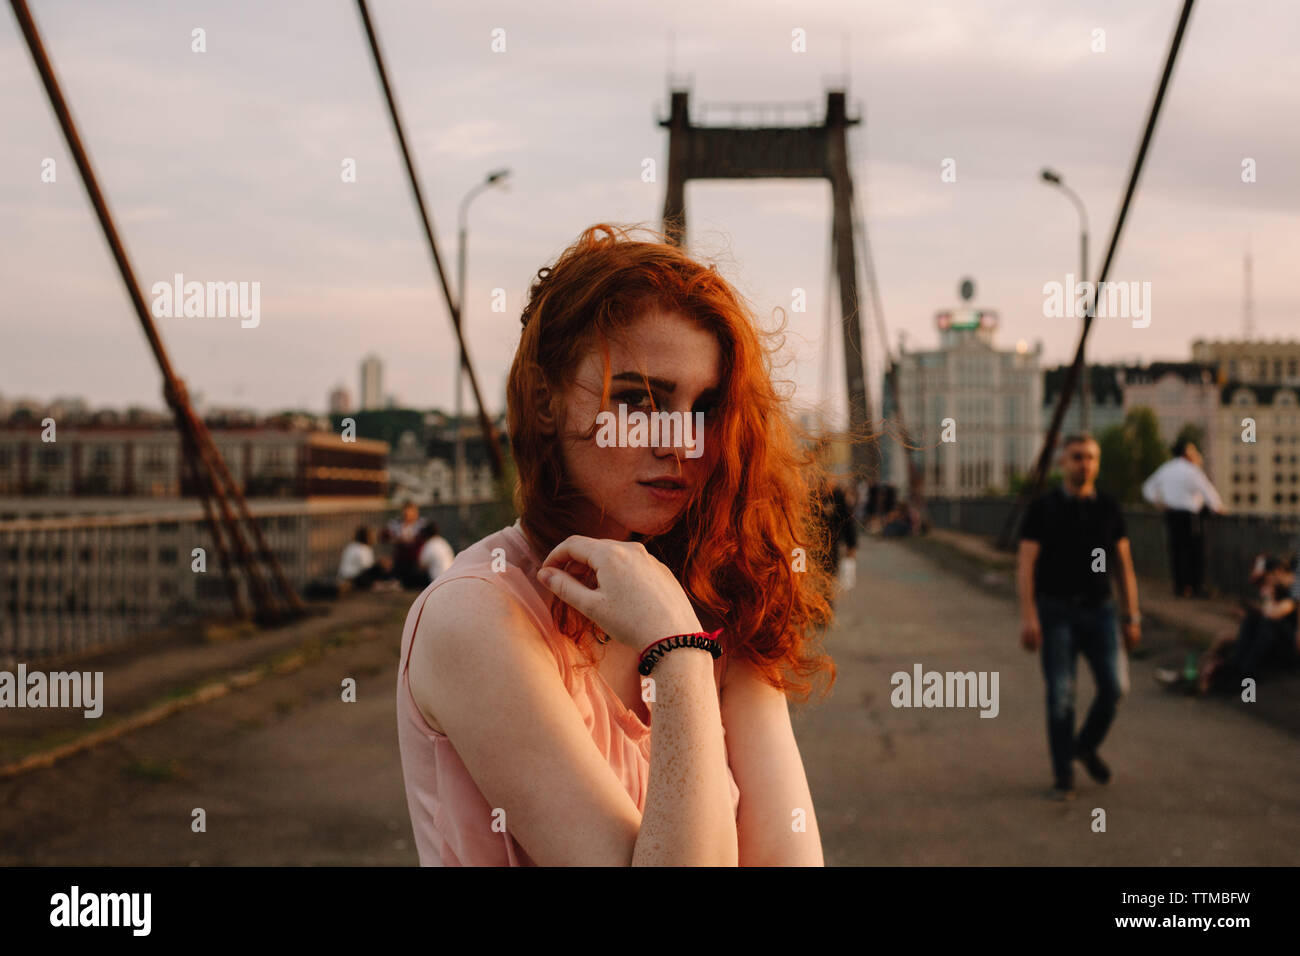 Portrait of cute teenage girl with red hair standing on bridge in city Stock Photo